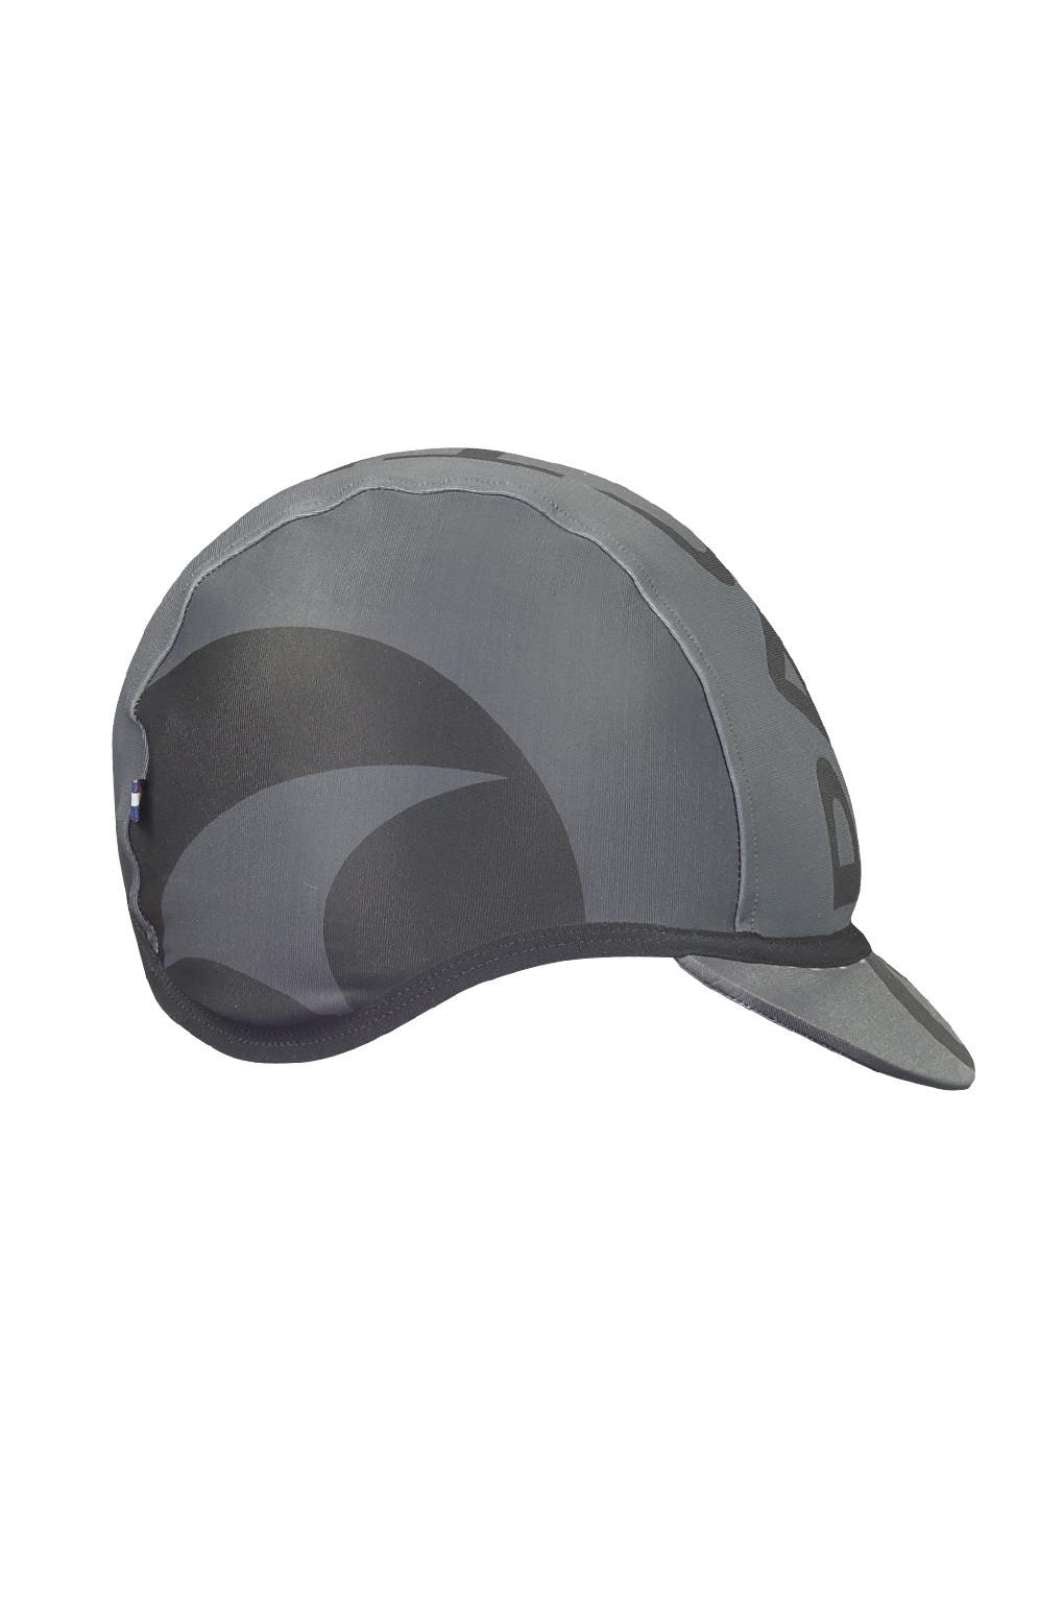 Black Winter Cycling Cap - Alpine Thermal Right View